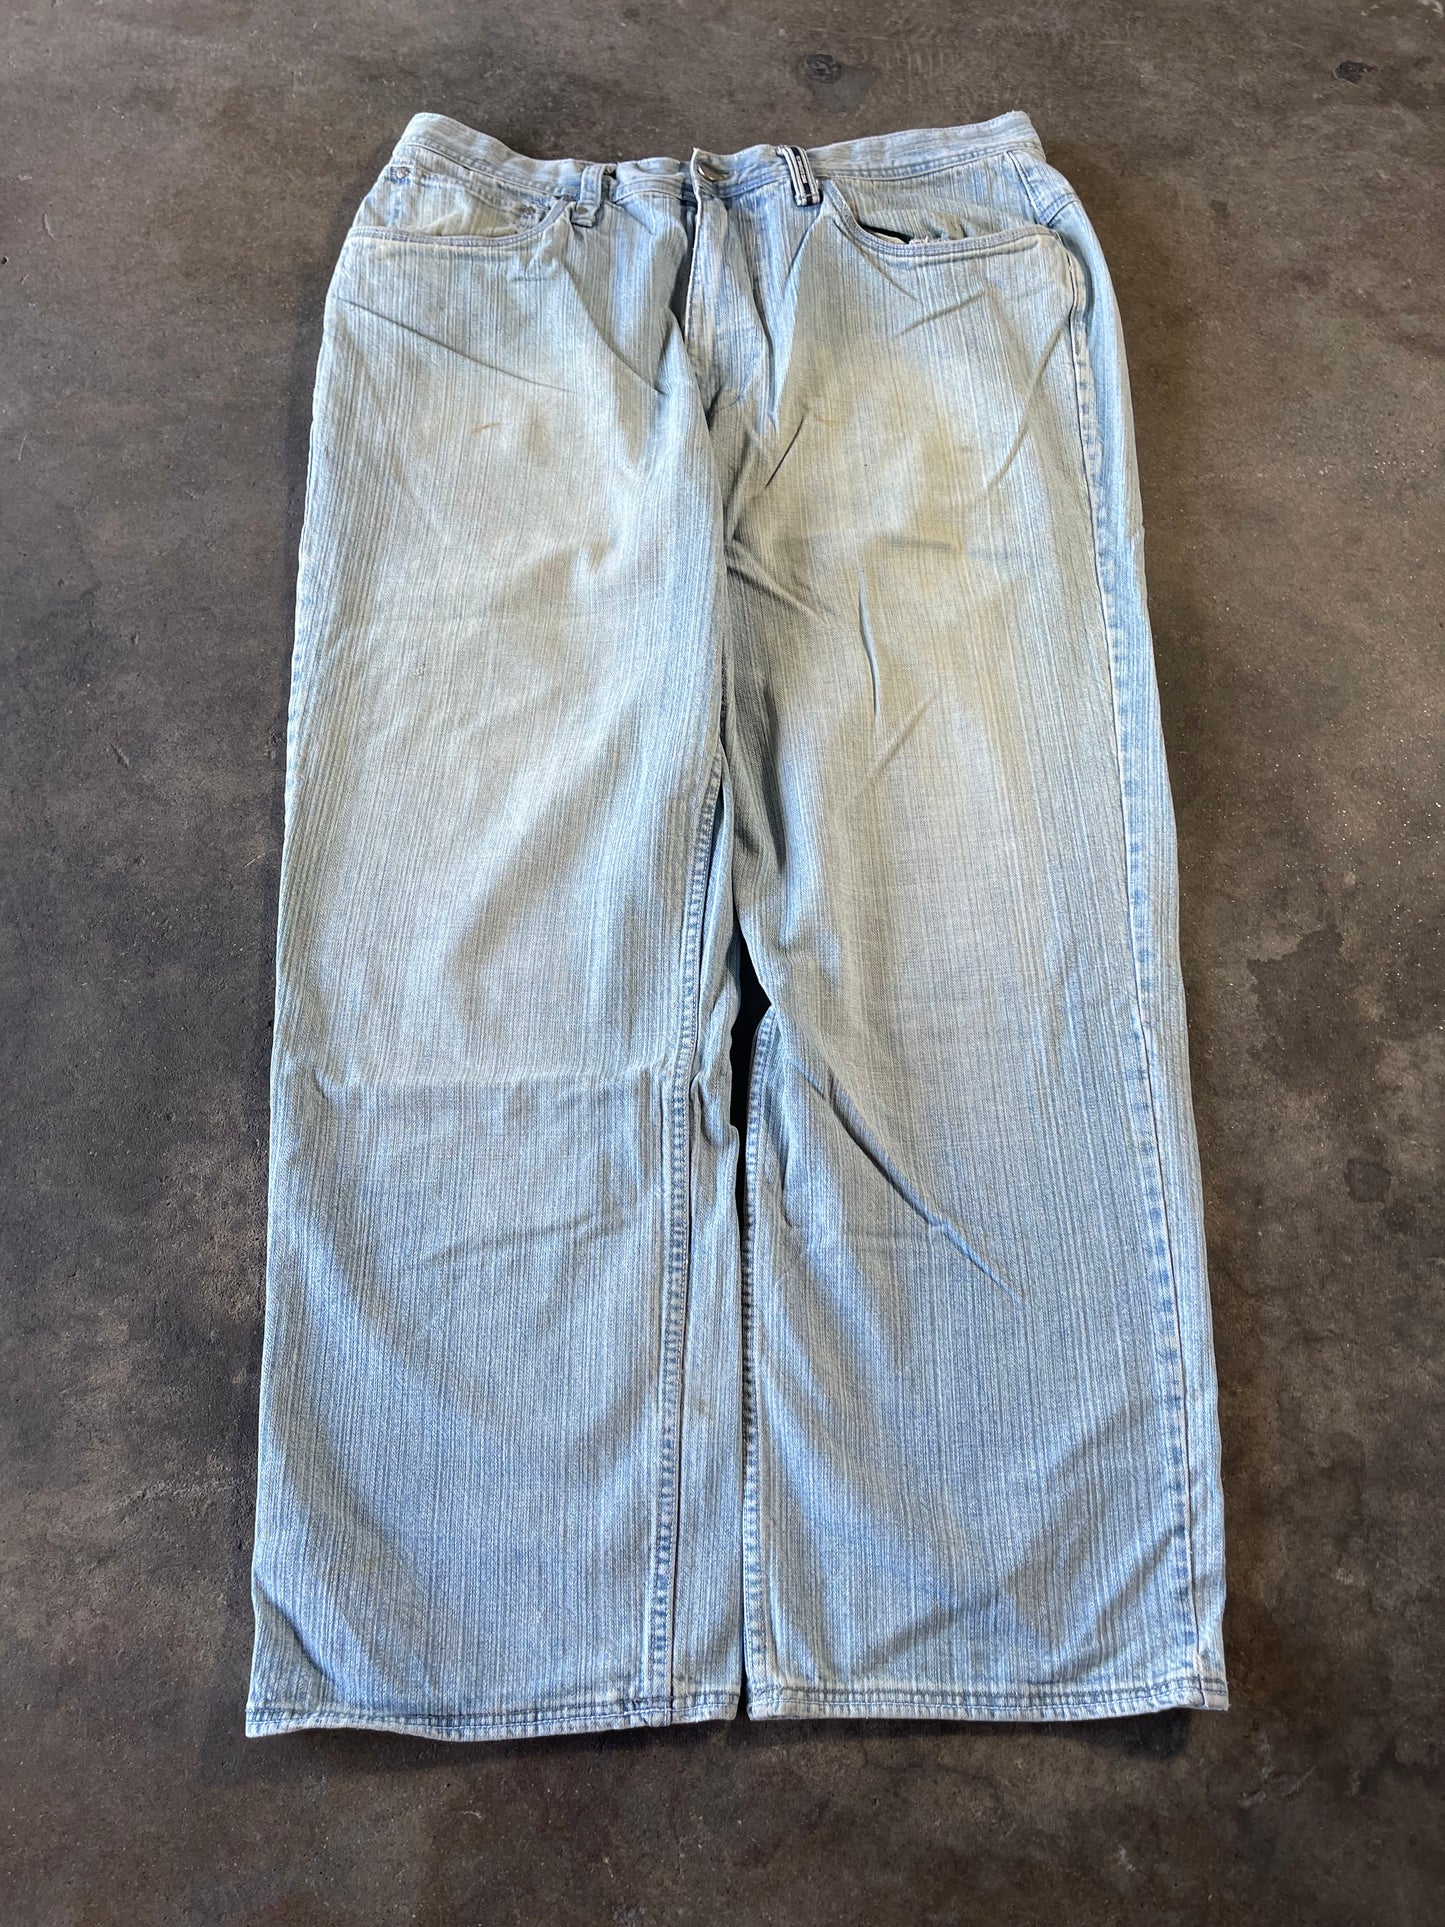 Baggy Light Washed Enyce Jeans 40x32